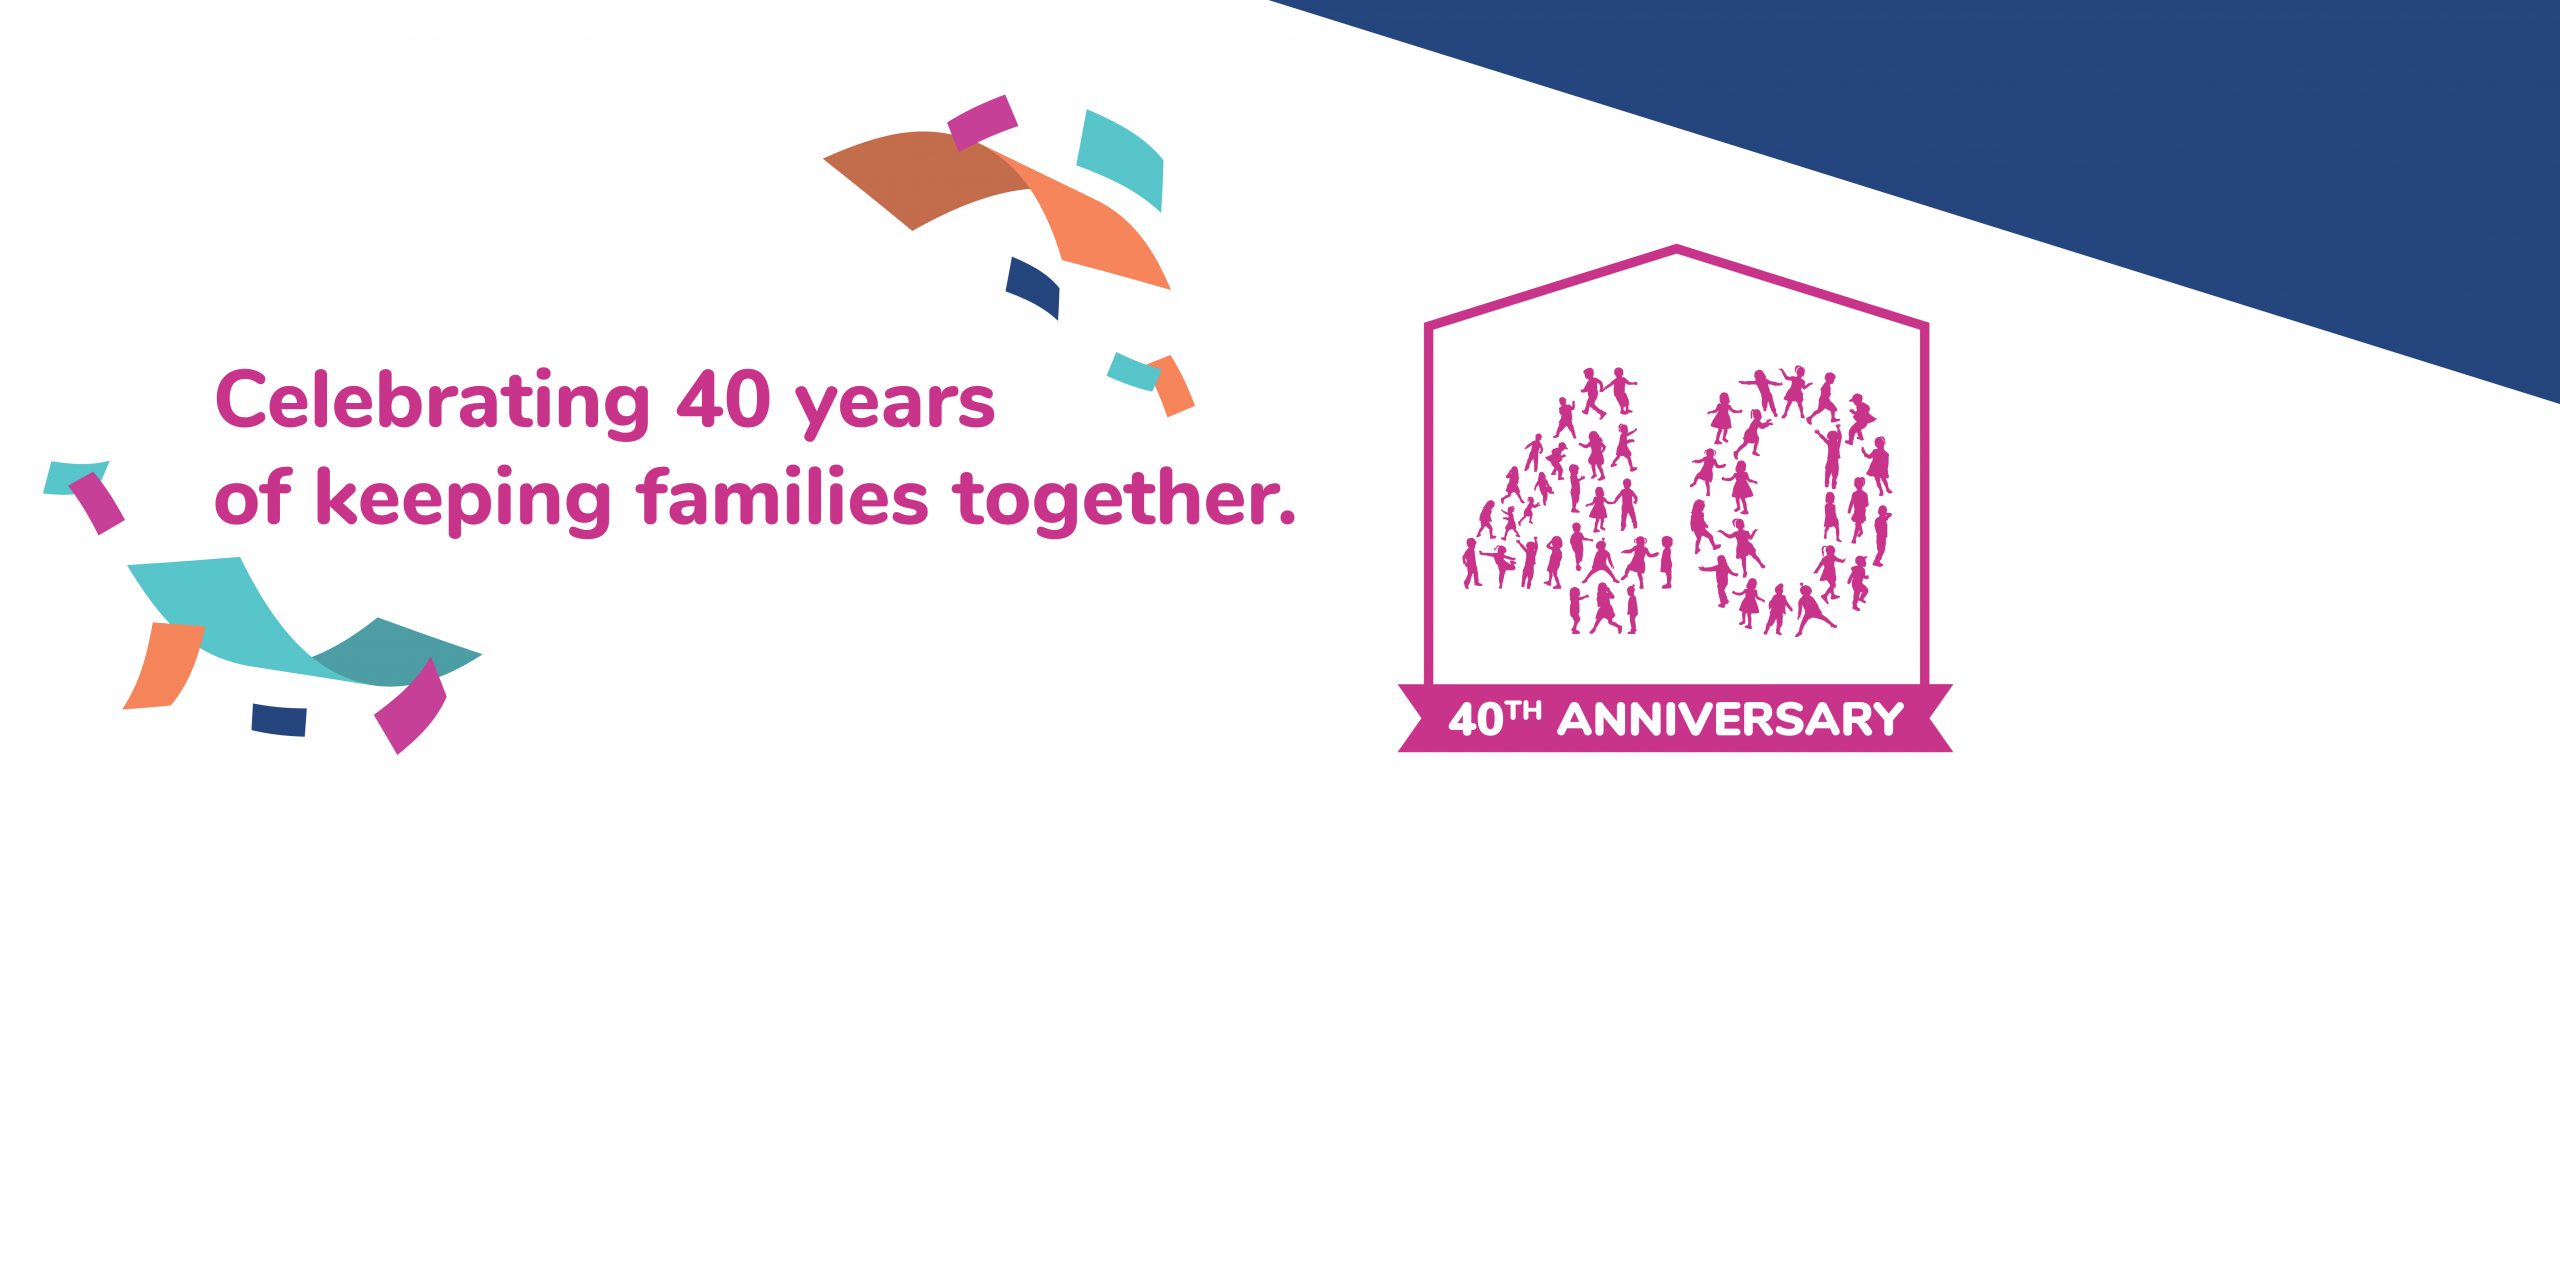 40 years of keeping families together